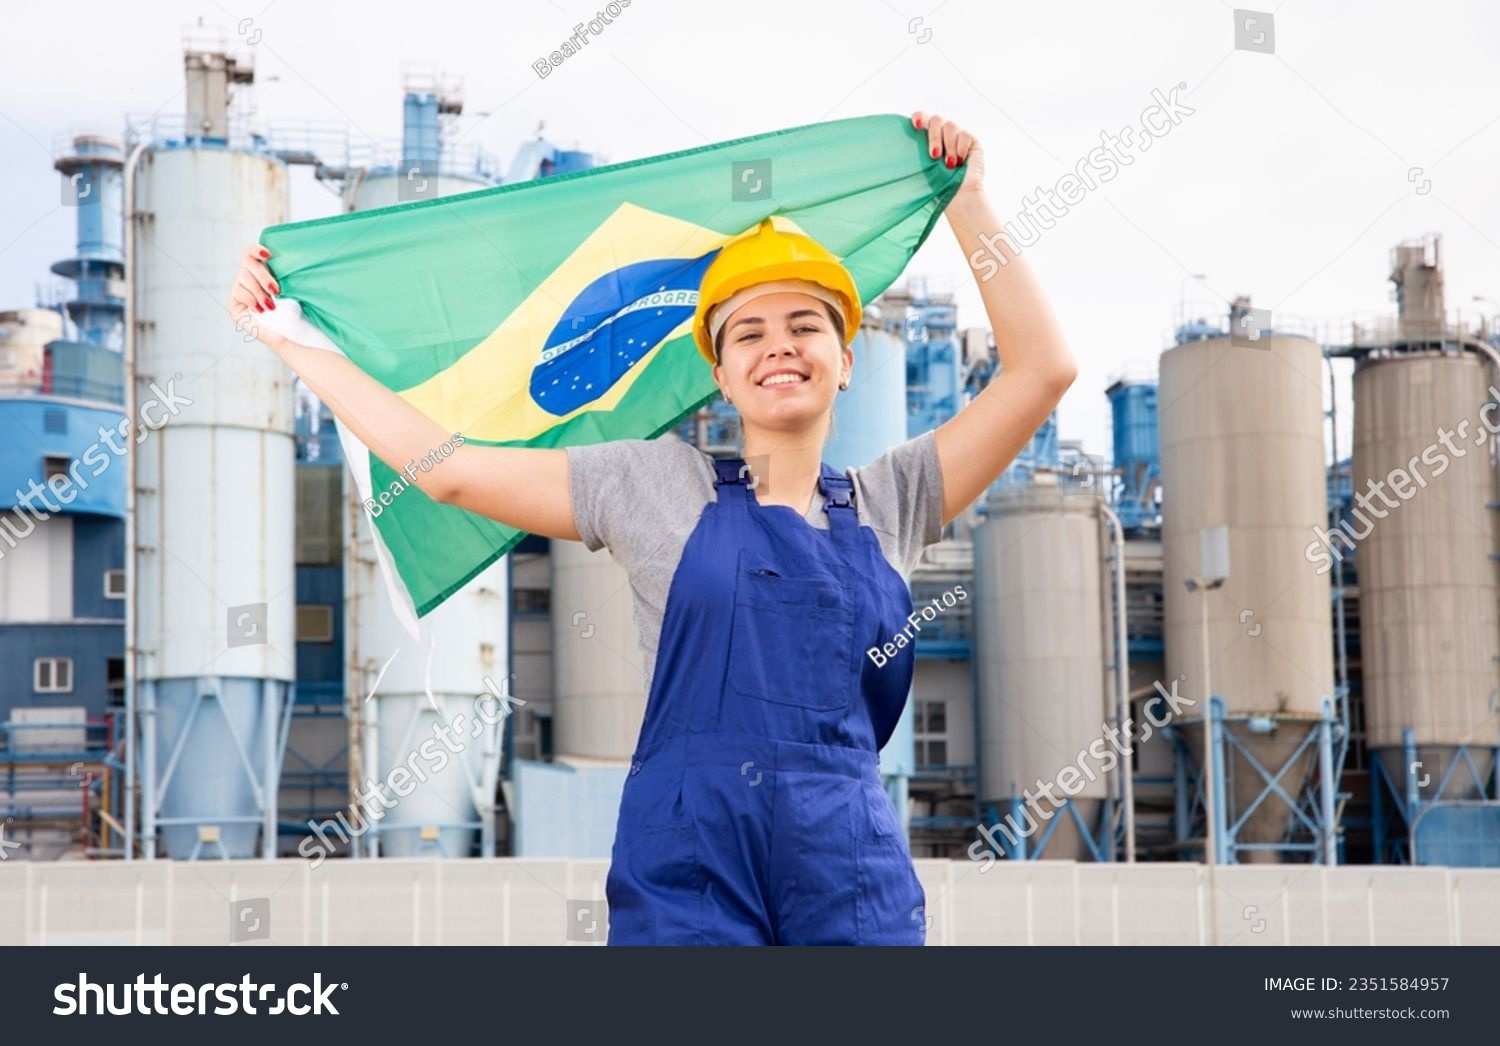 Cheerful female worker in hardhat with brazilian flag standing in front of factory #2351584957